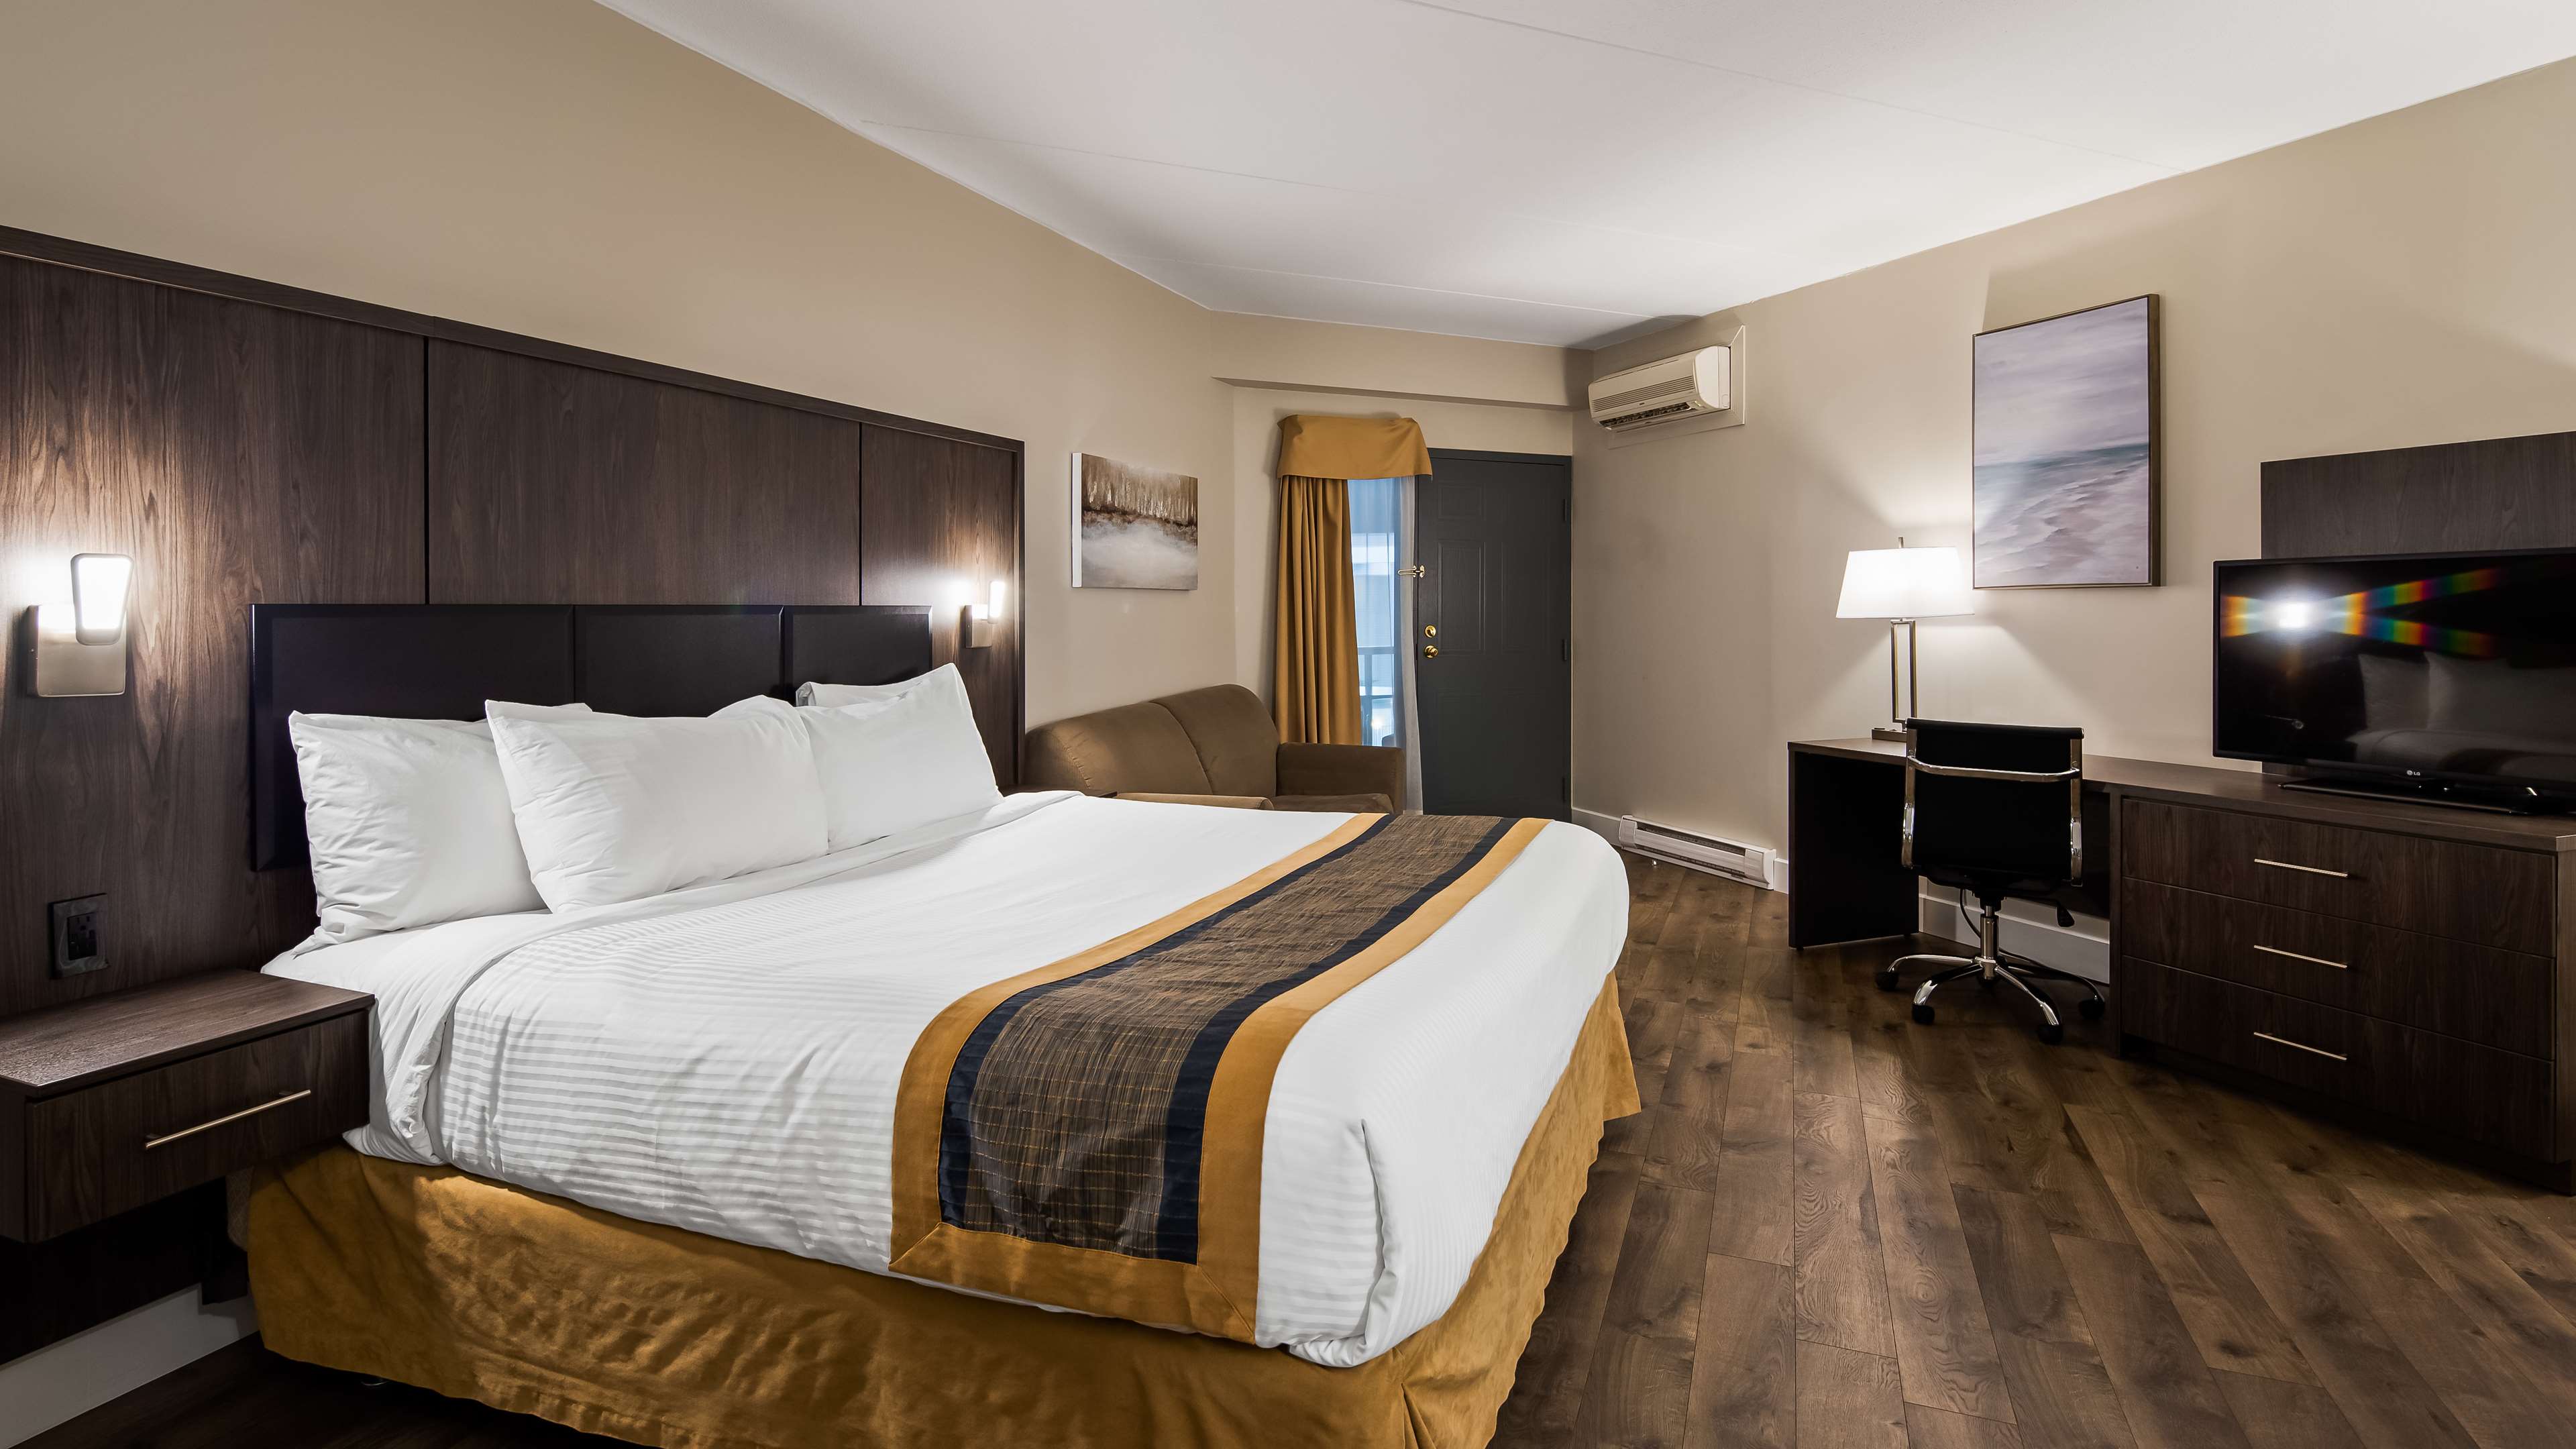 King room with balcony Best Western Laval-Montreal Laval (450)681-9000